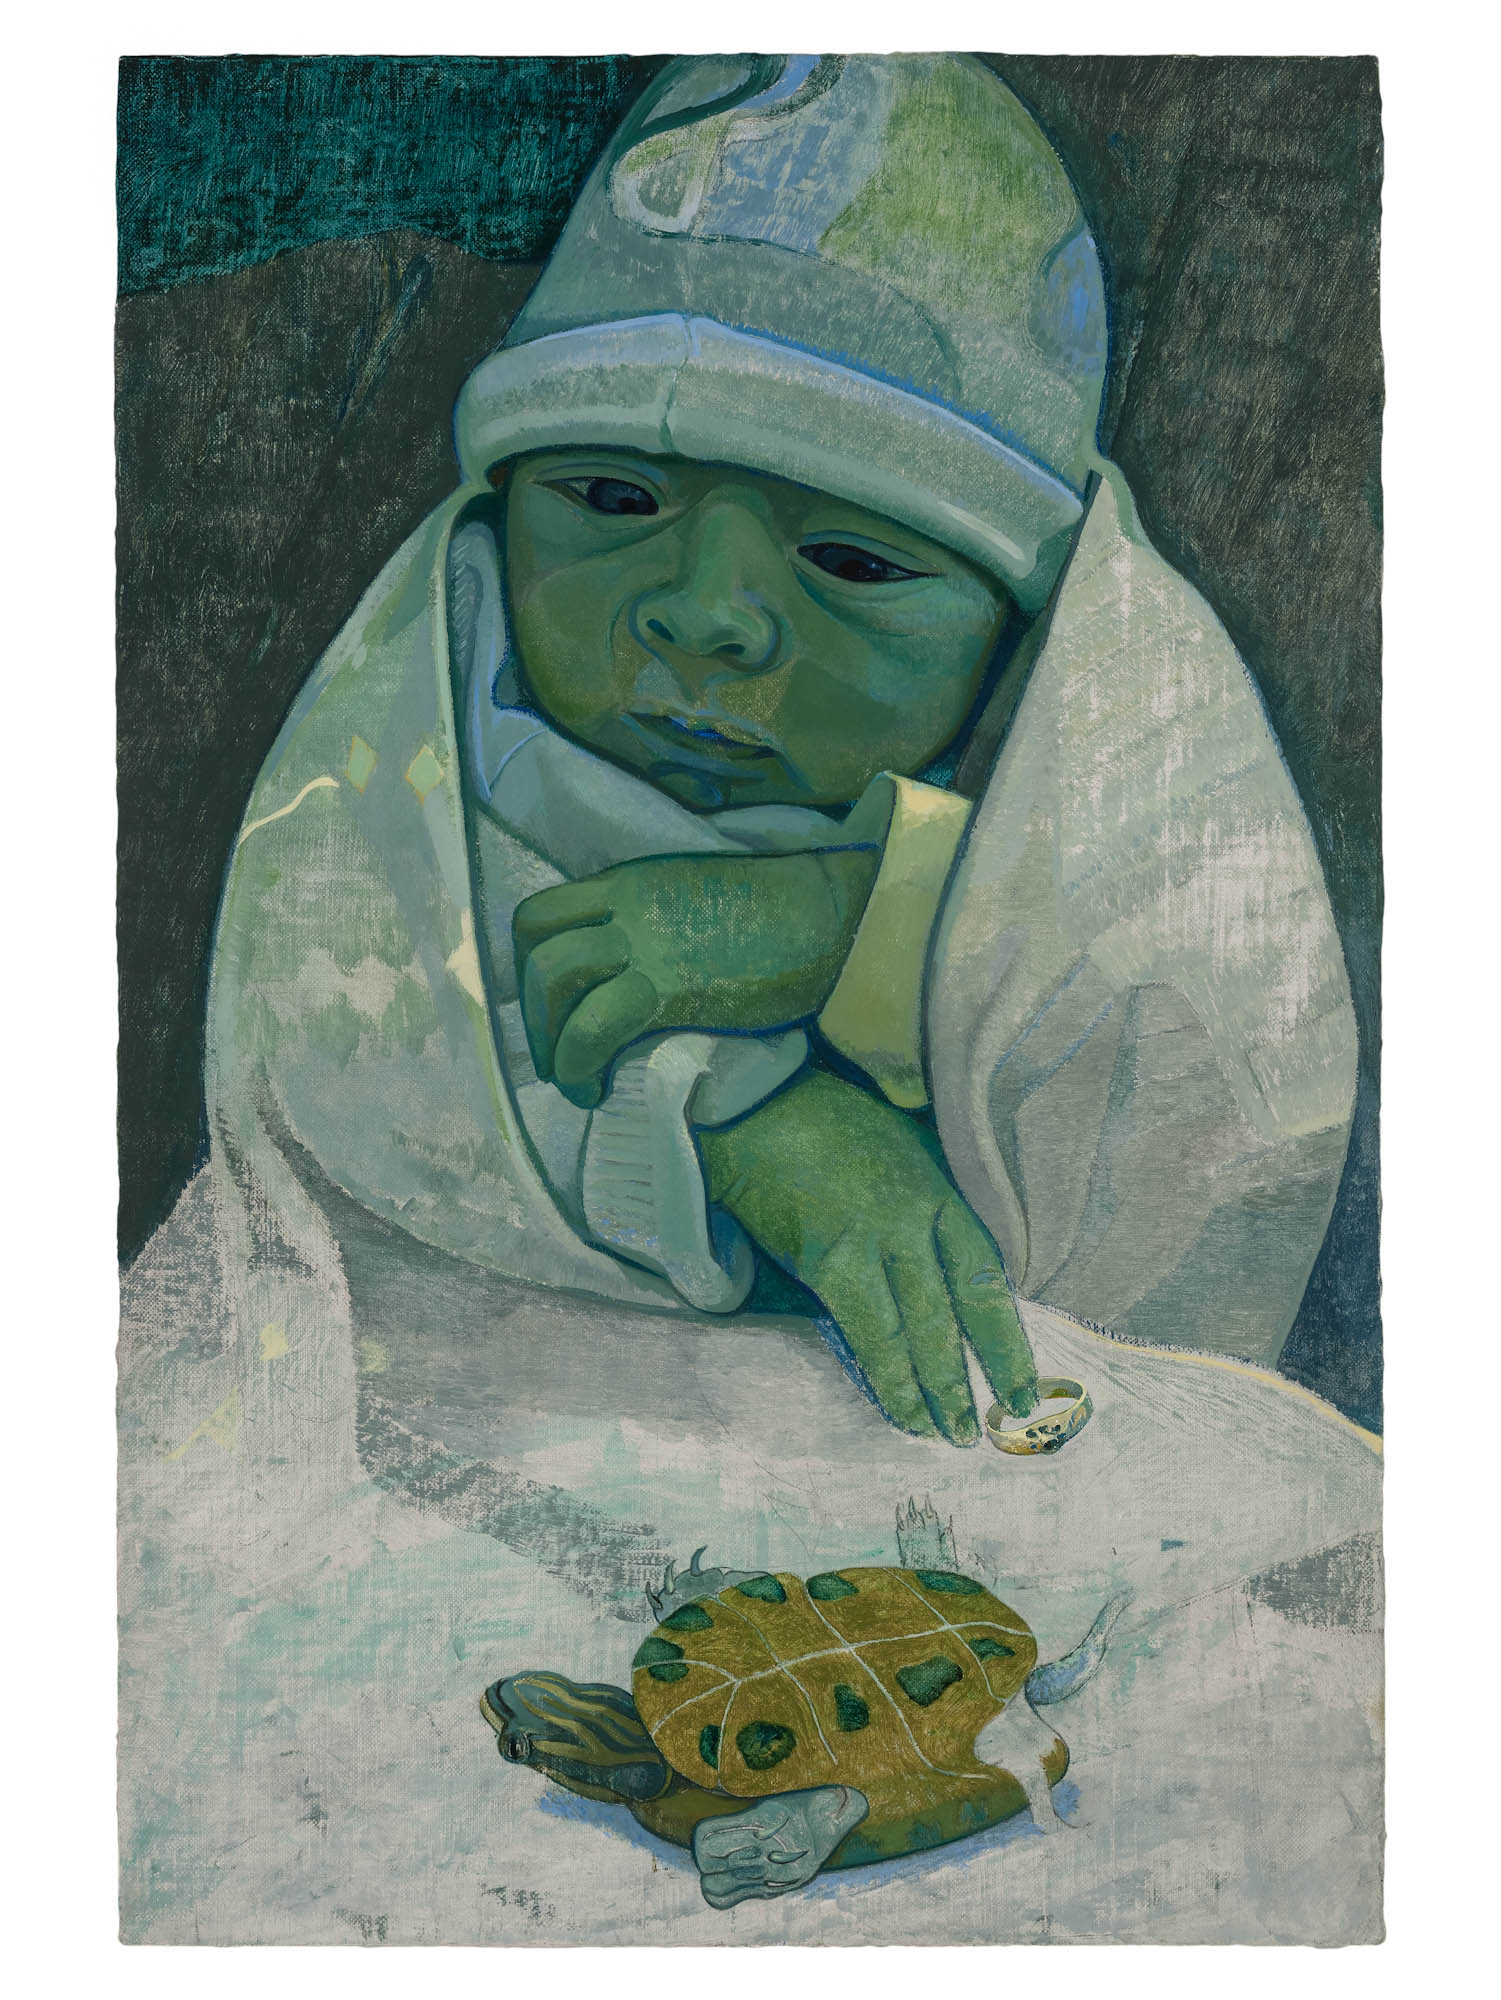 <i>R with Turtle</i>, 2018<br />Oil on canvas mounted on wood<br />14 1/8 x 9 1/2 inches (36 x 24 cm)<br />14 7/8 x 10 1/8 x 1 1/2 inches (37.8 x 25.8 x 4 cm) framed